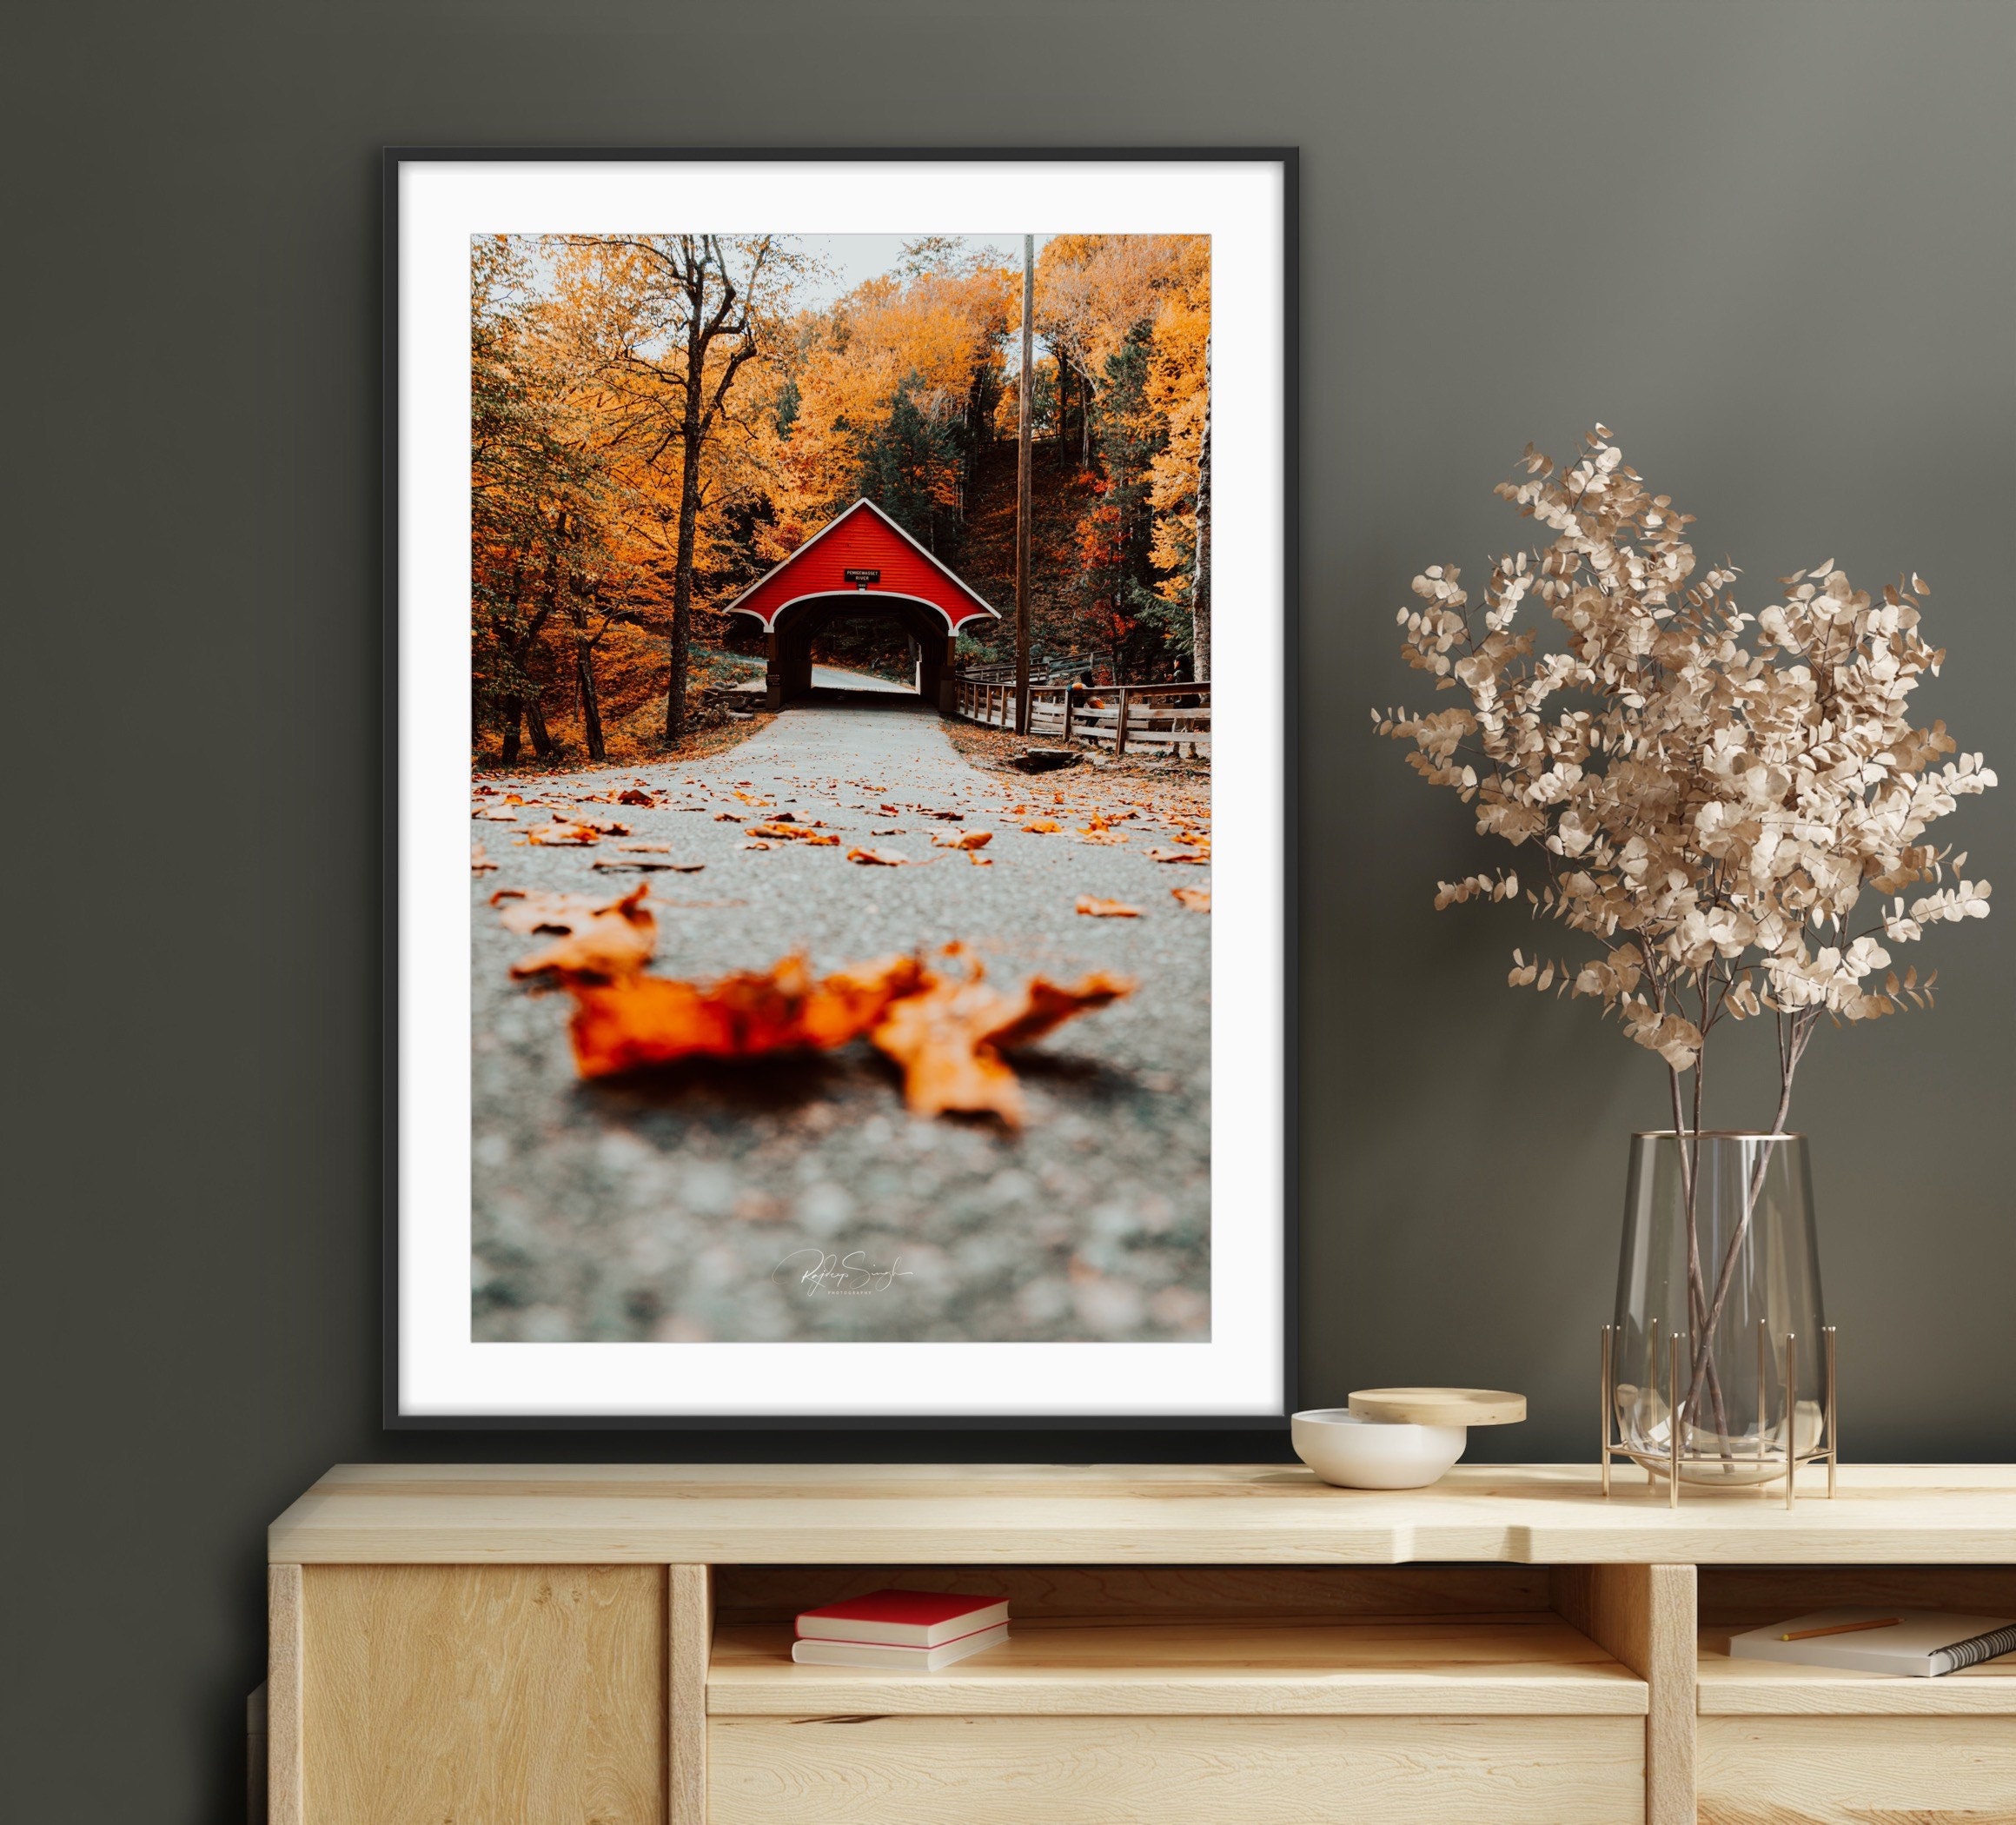 Choose 12x16 or 8x10 Print Matted to Fit 16x20 Frame or 8x10 